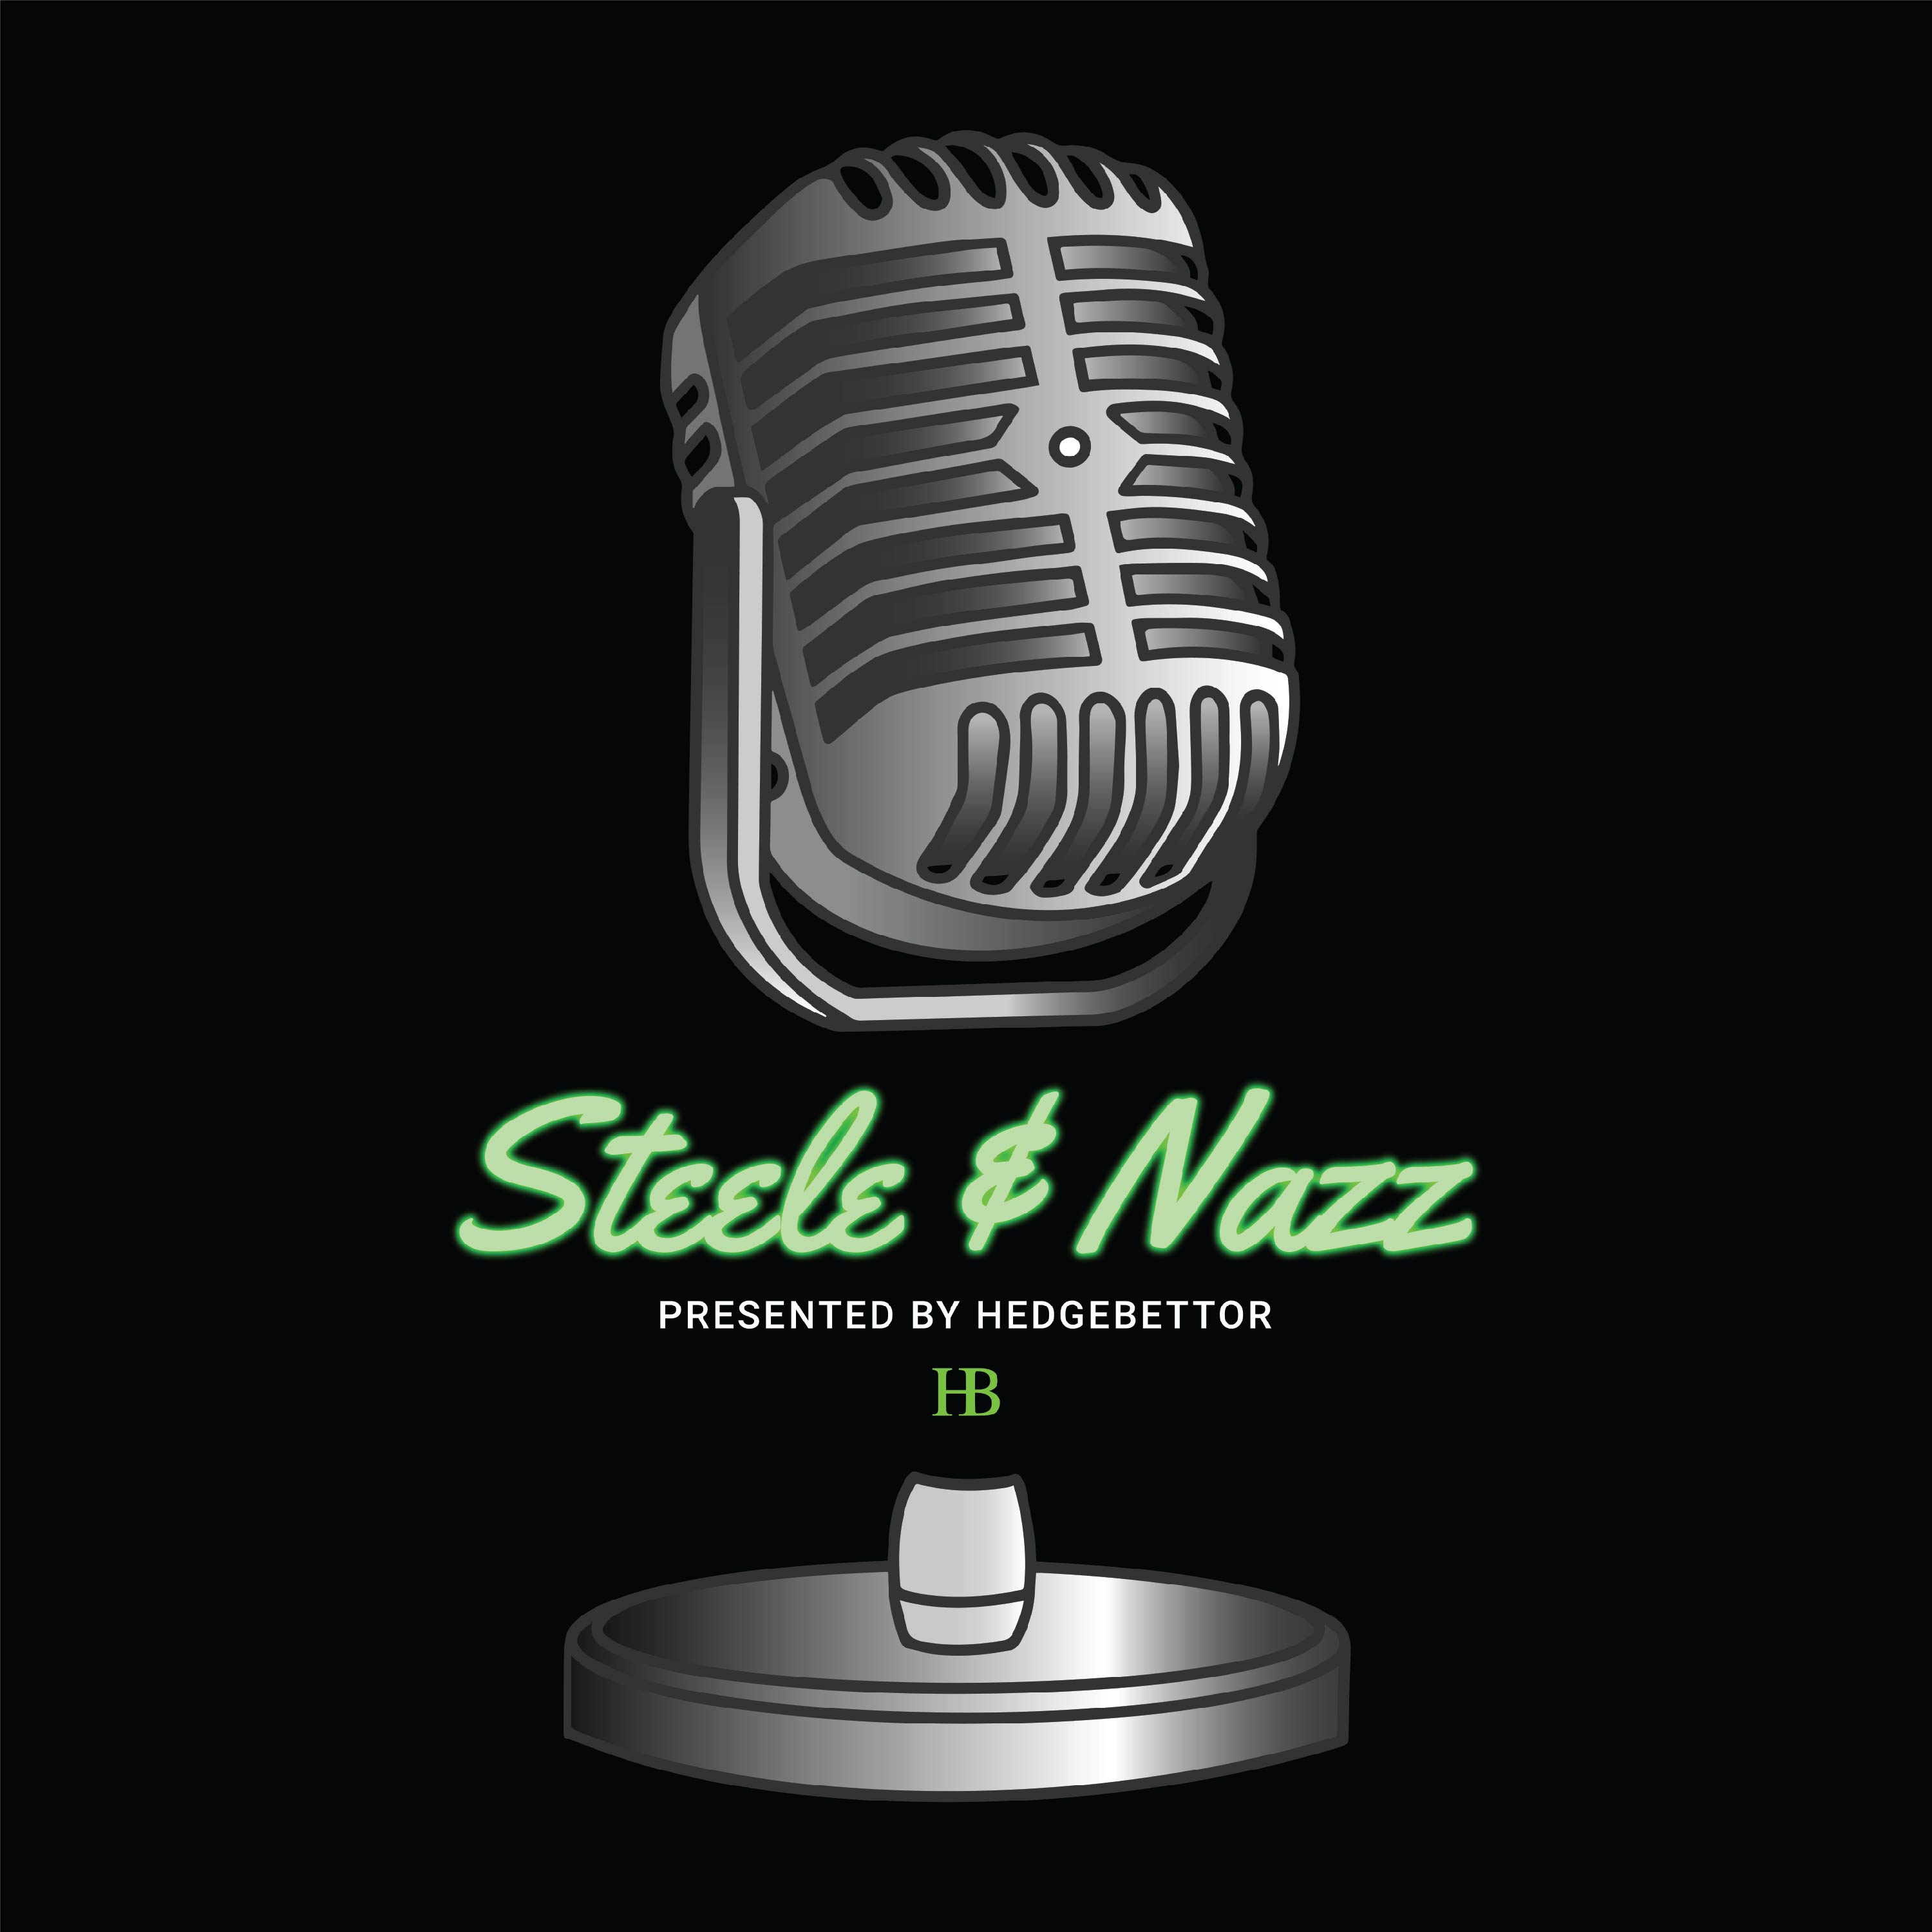 Steele & Nazz - Ep. 35: Featuring Spittin' Chiclets producer Mike Grinnell